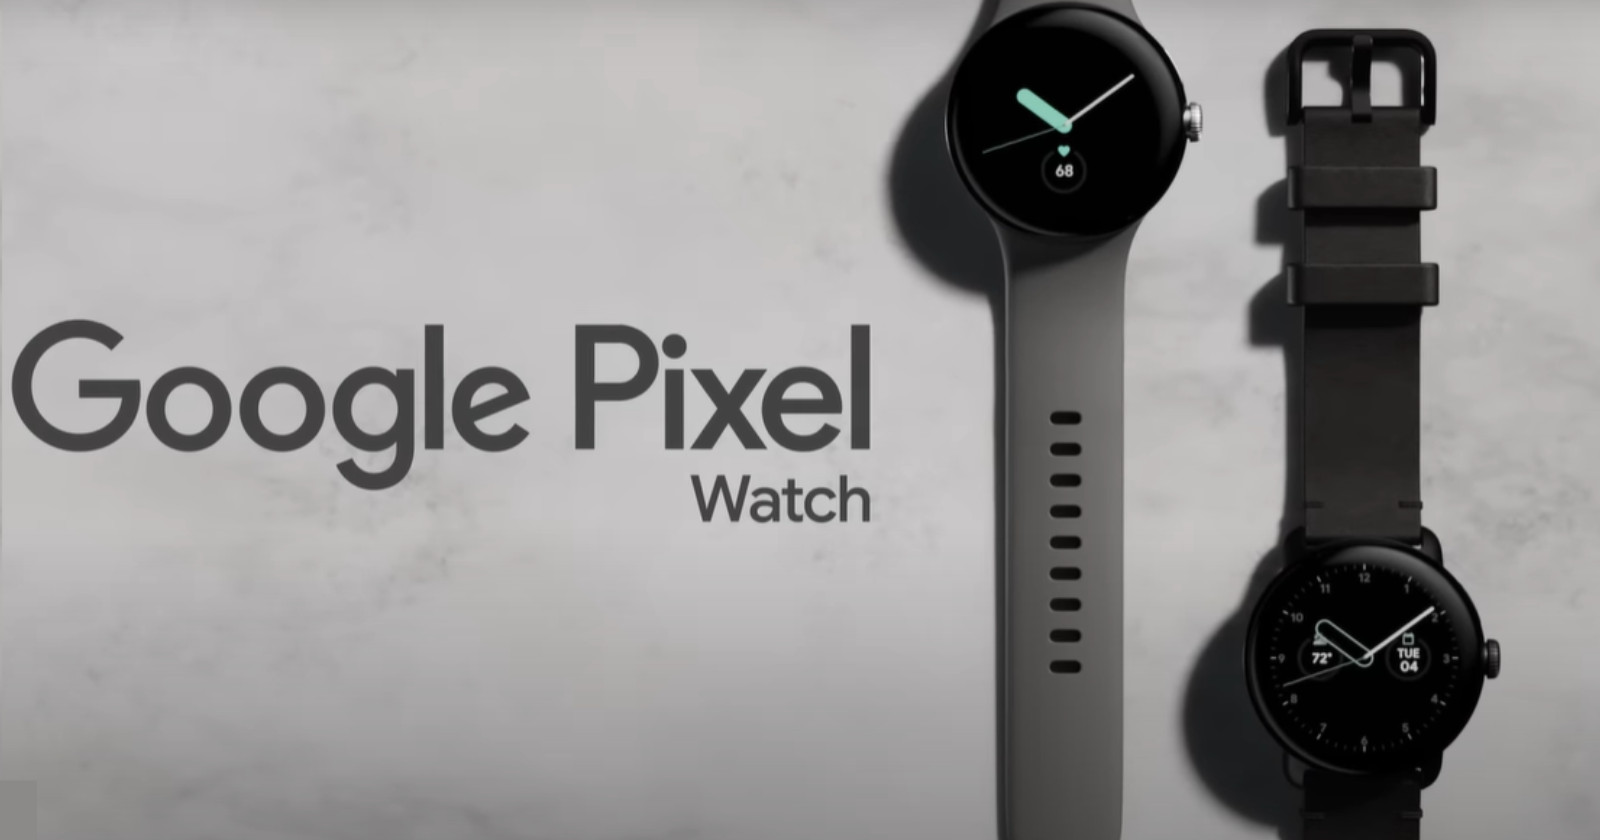 You can bag a Google Pixel Watch for nearly half its price at Amazon in the UK